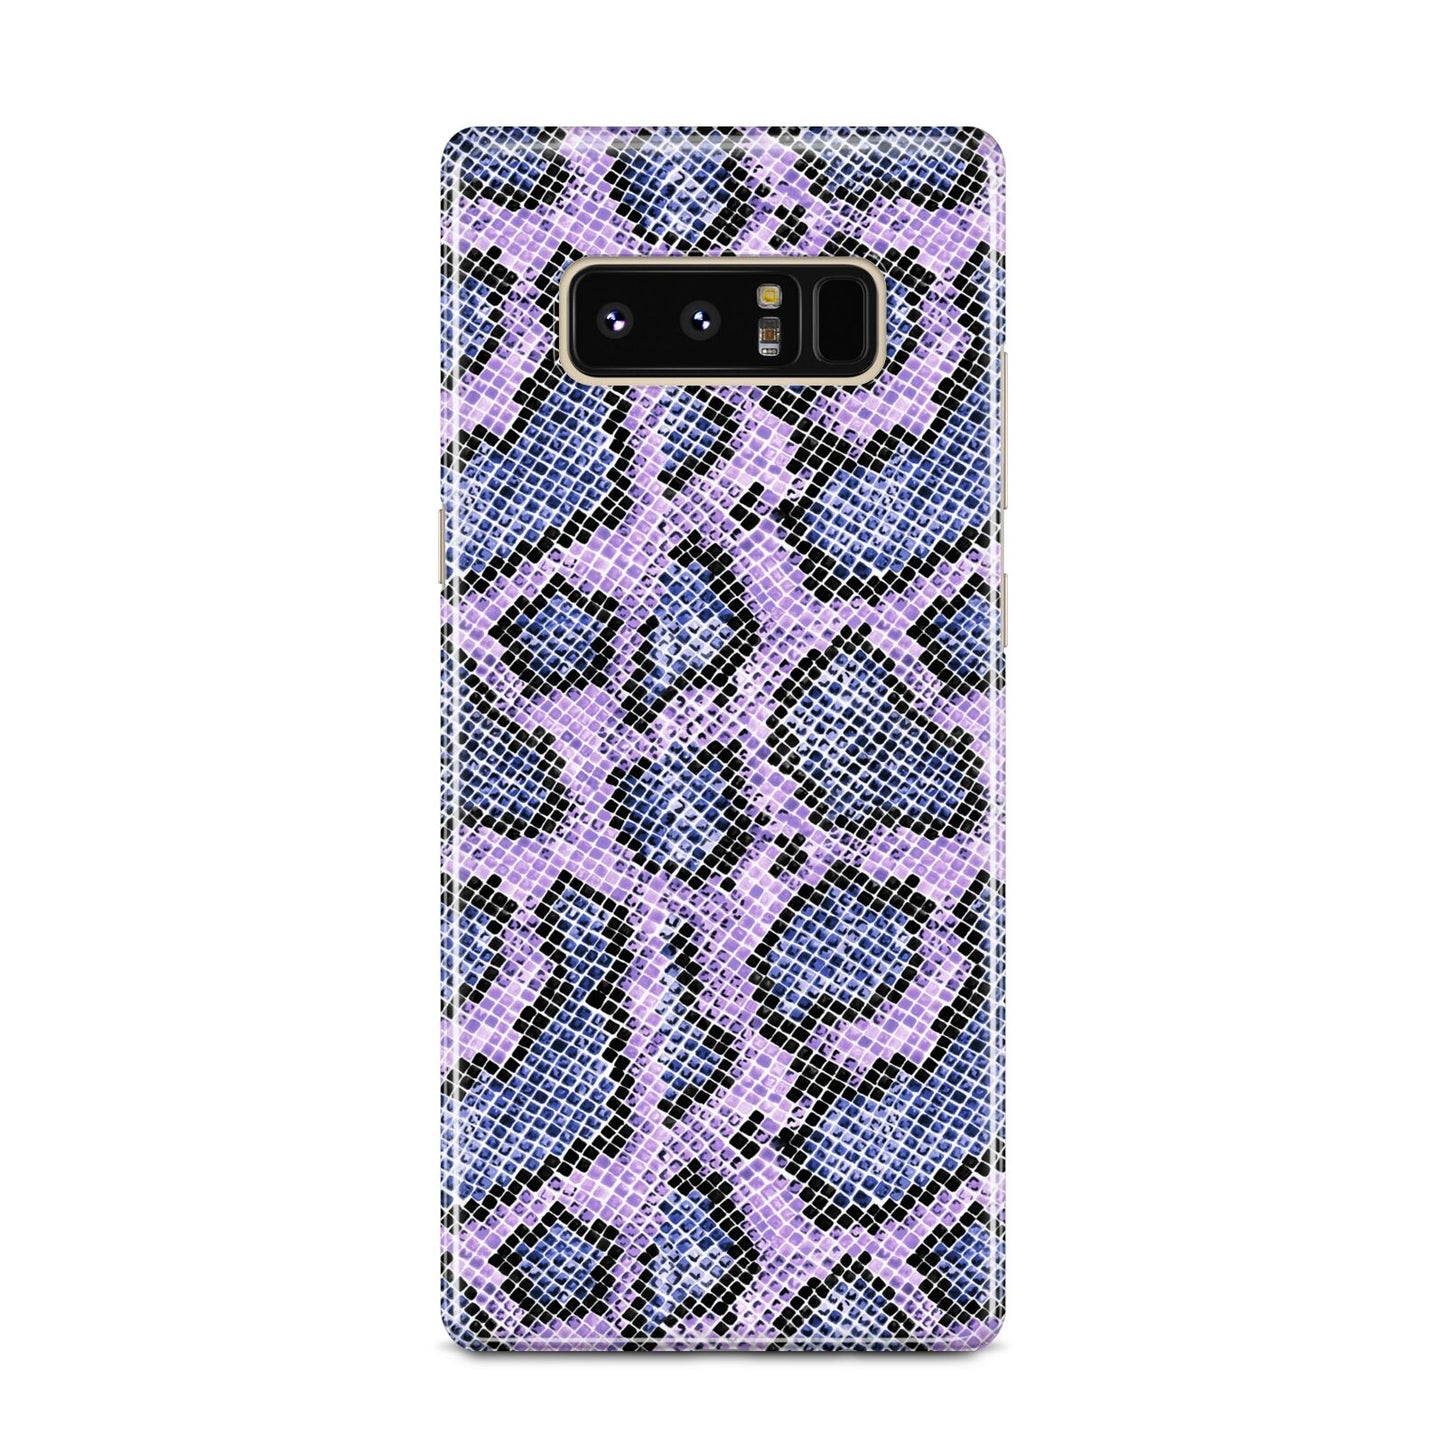 Purple And Blue Snakeskin Samsung Galaxy Note 8 Case